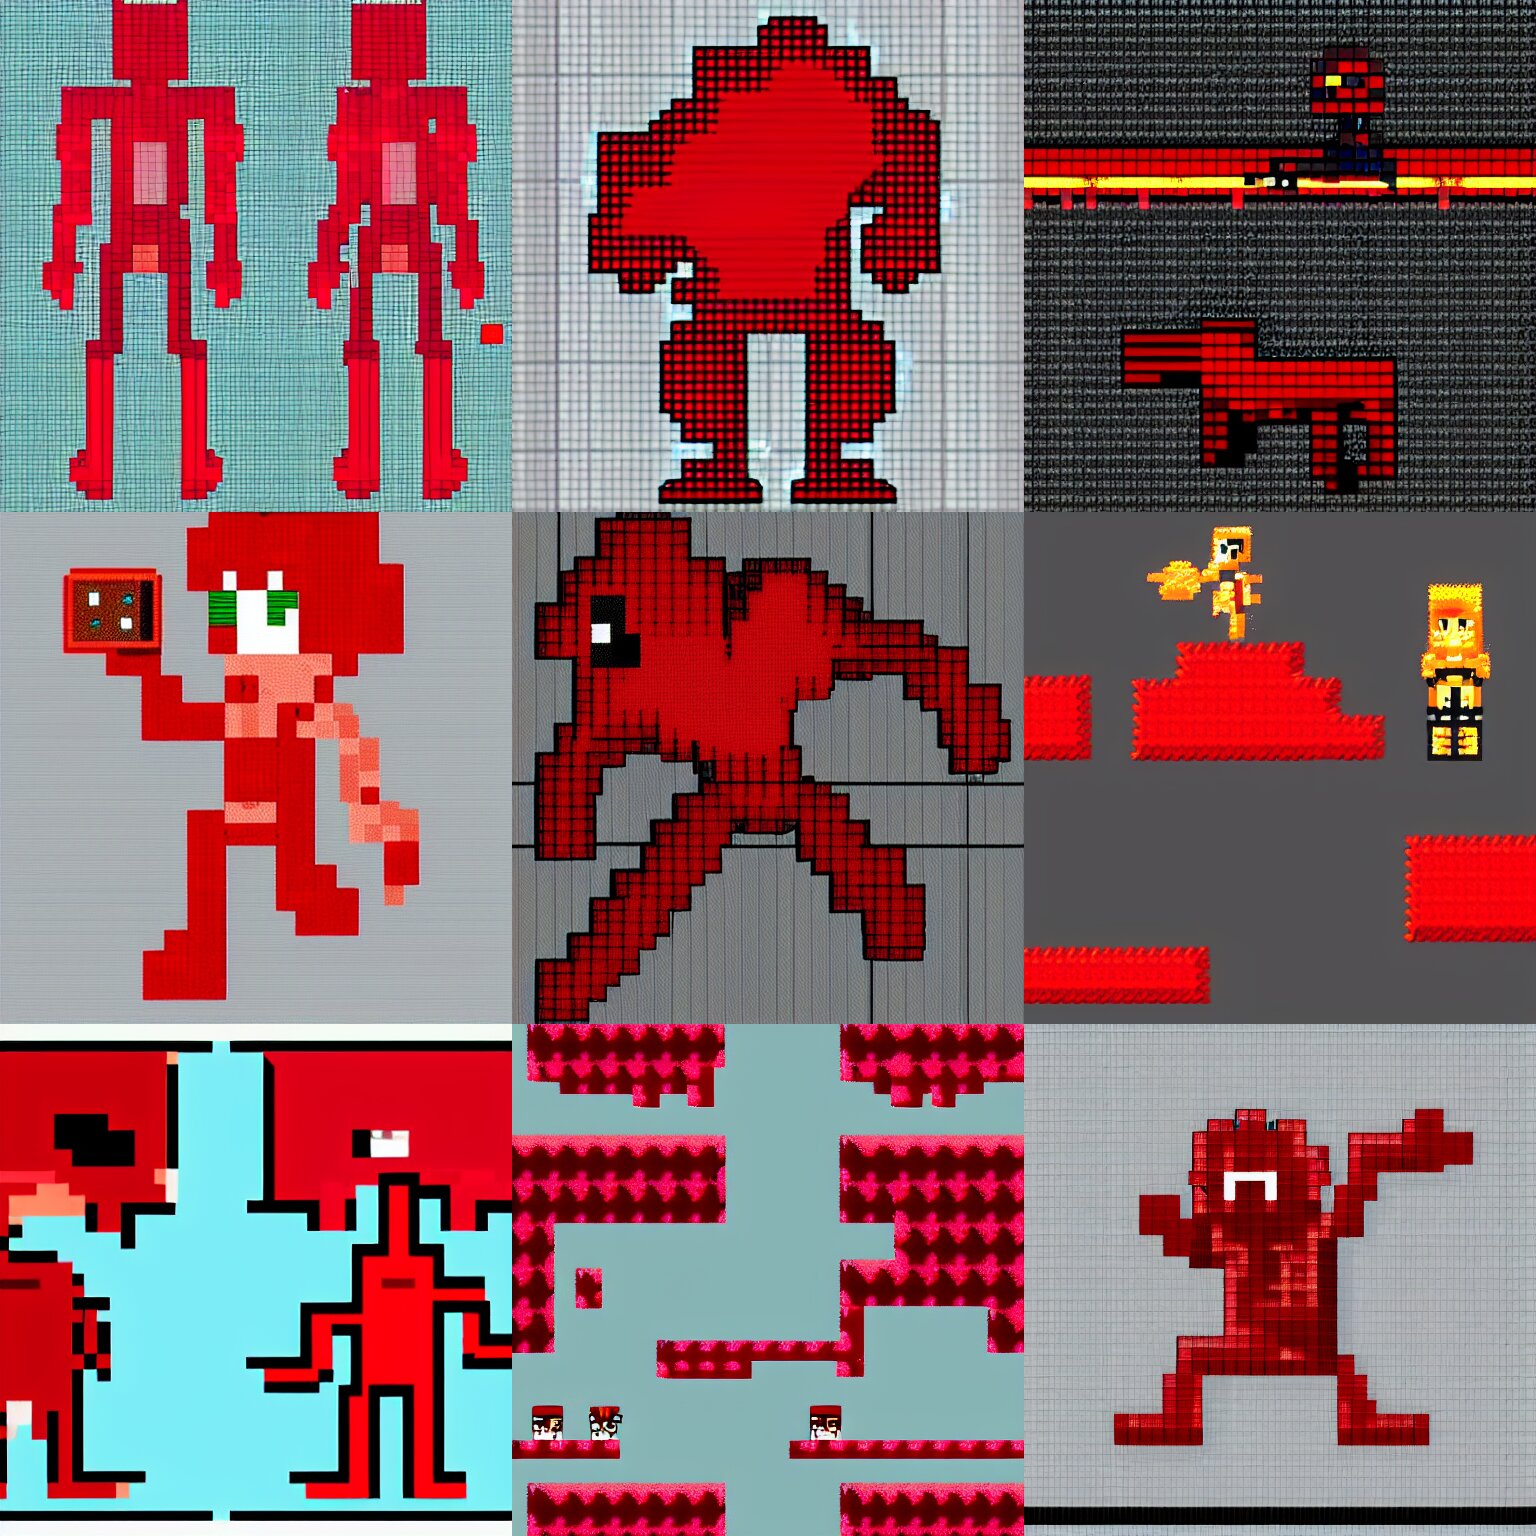 2D blood red sprite for platformer character, extreme detail, pixel art indie game, style of Super Meat Boy